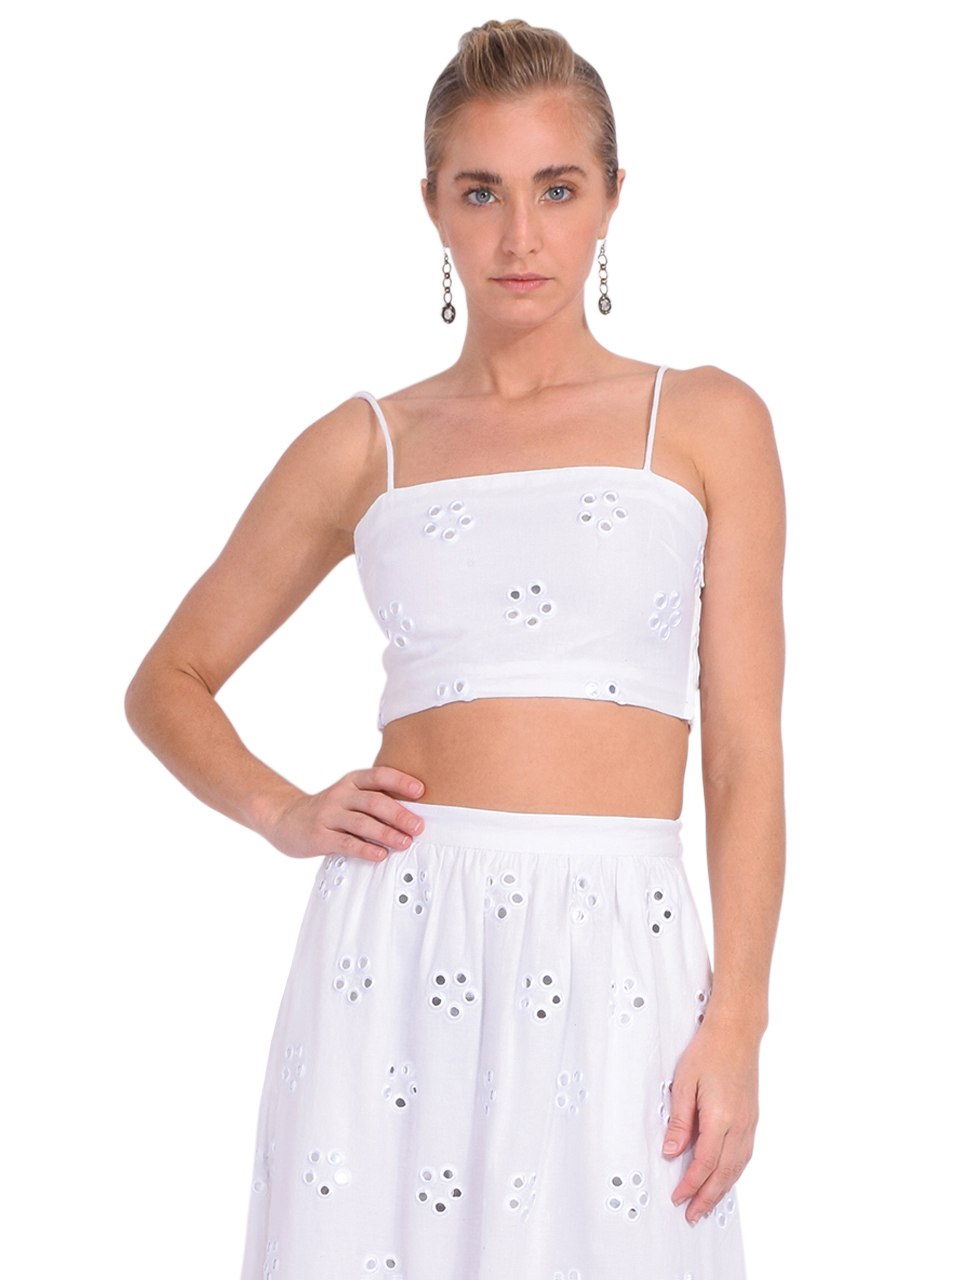 RHODE Dina Top in White Mirror Daisy Front View 